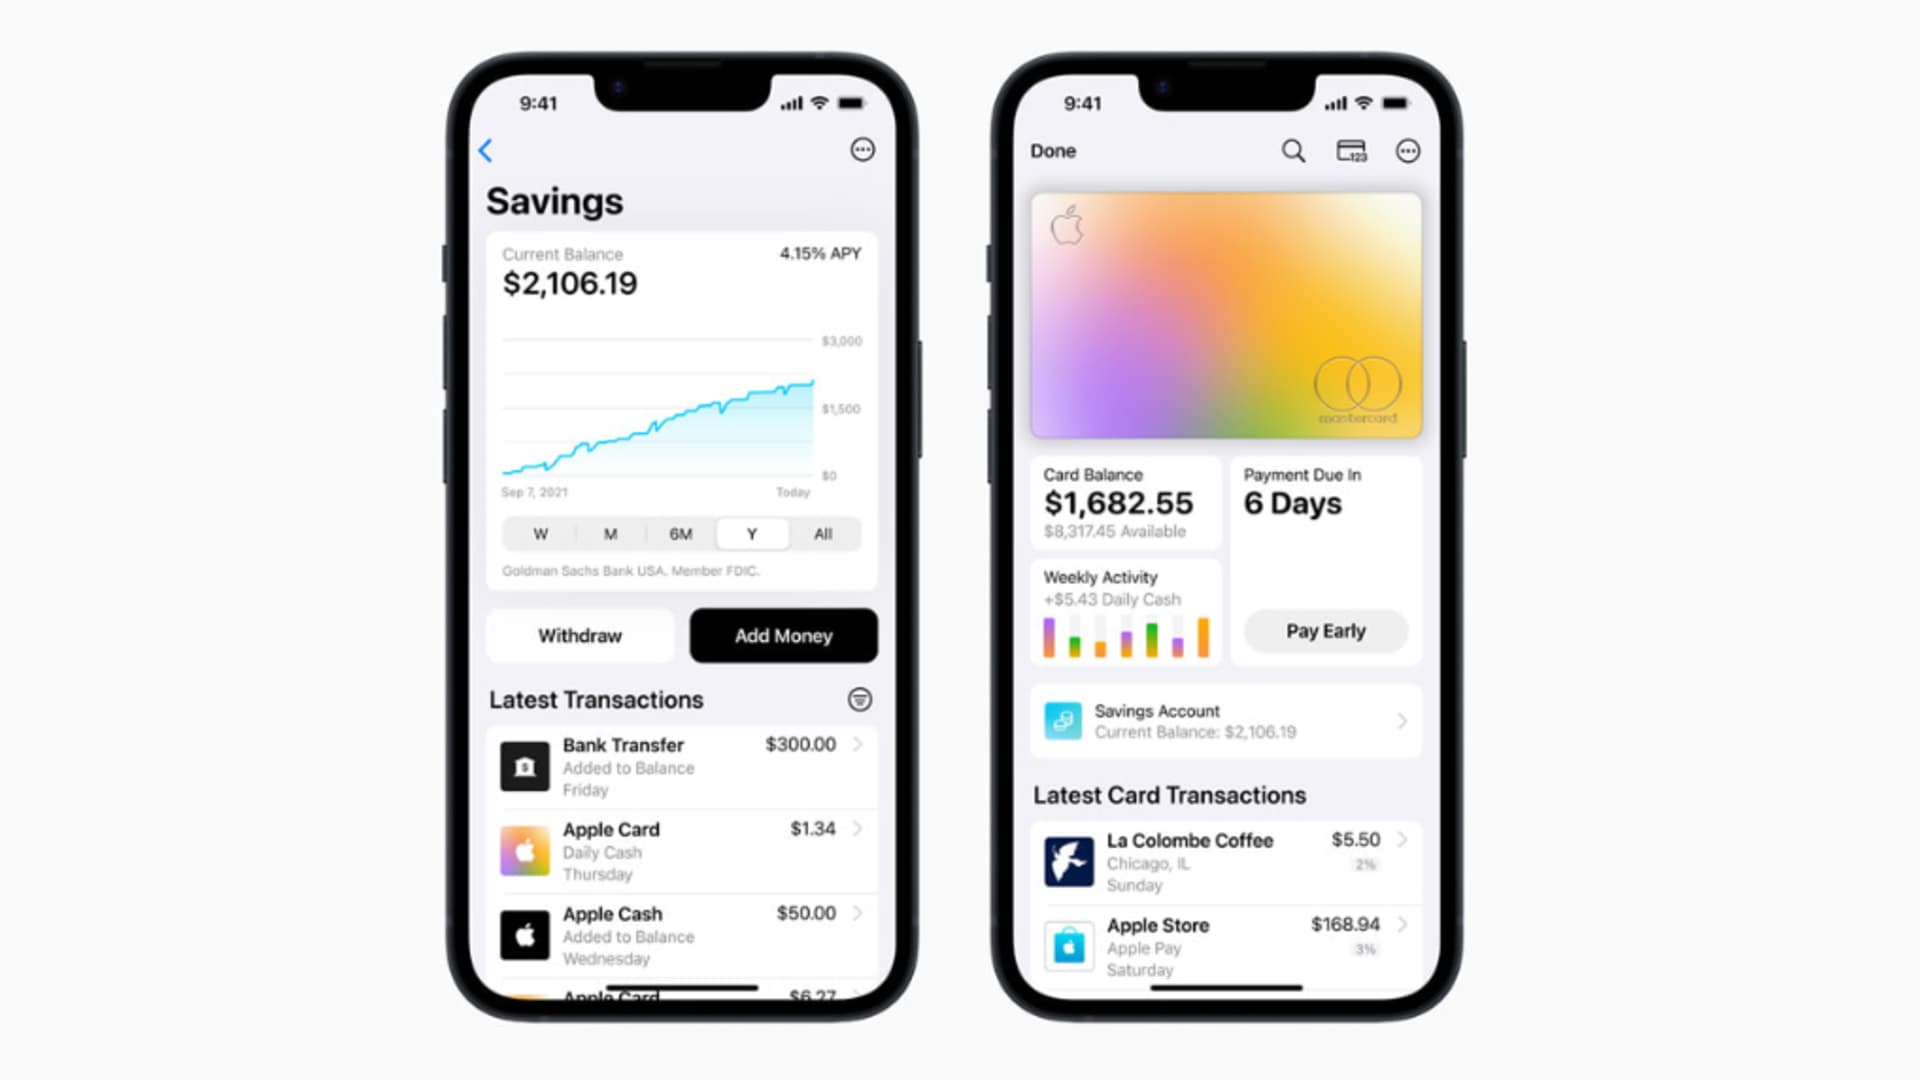 Apple launches its savings account with 4.15% interest rate